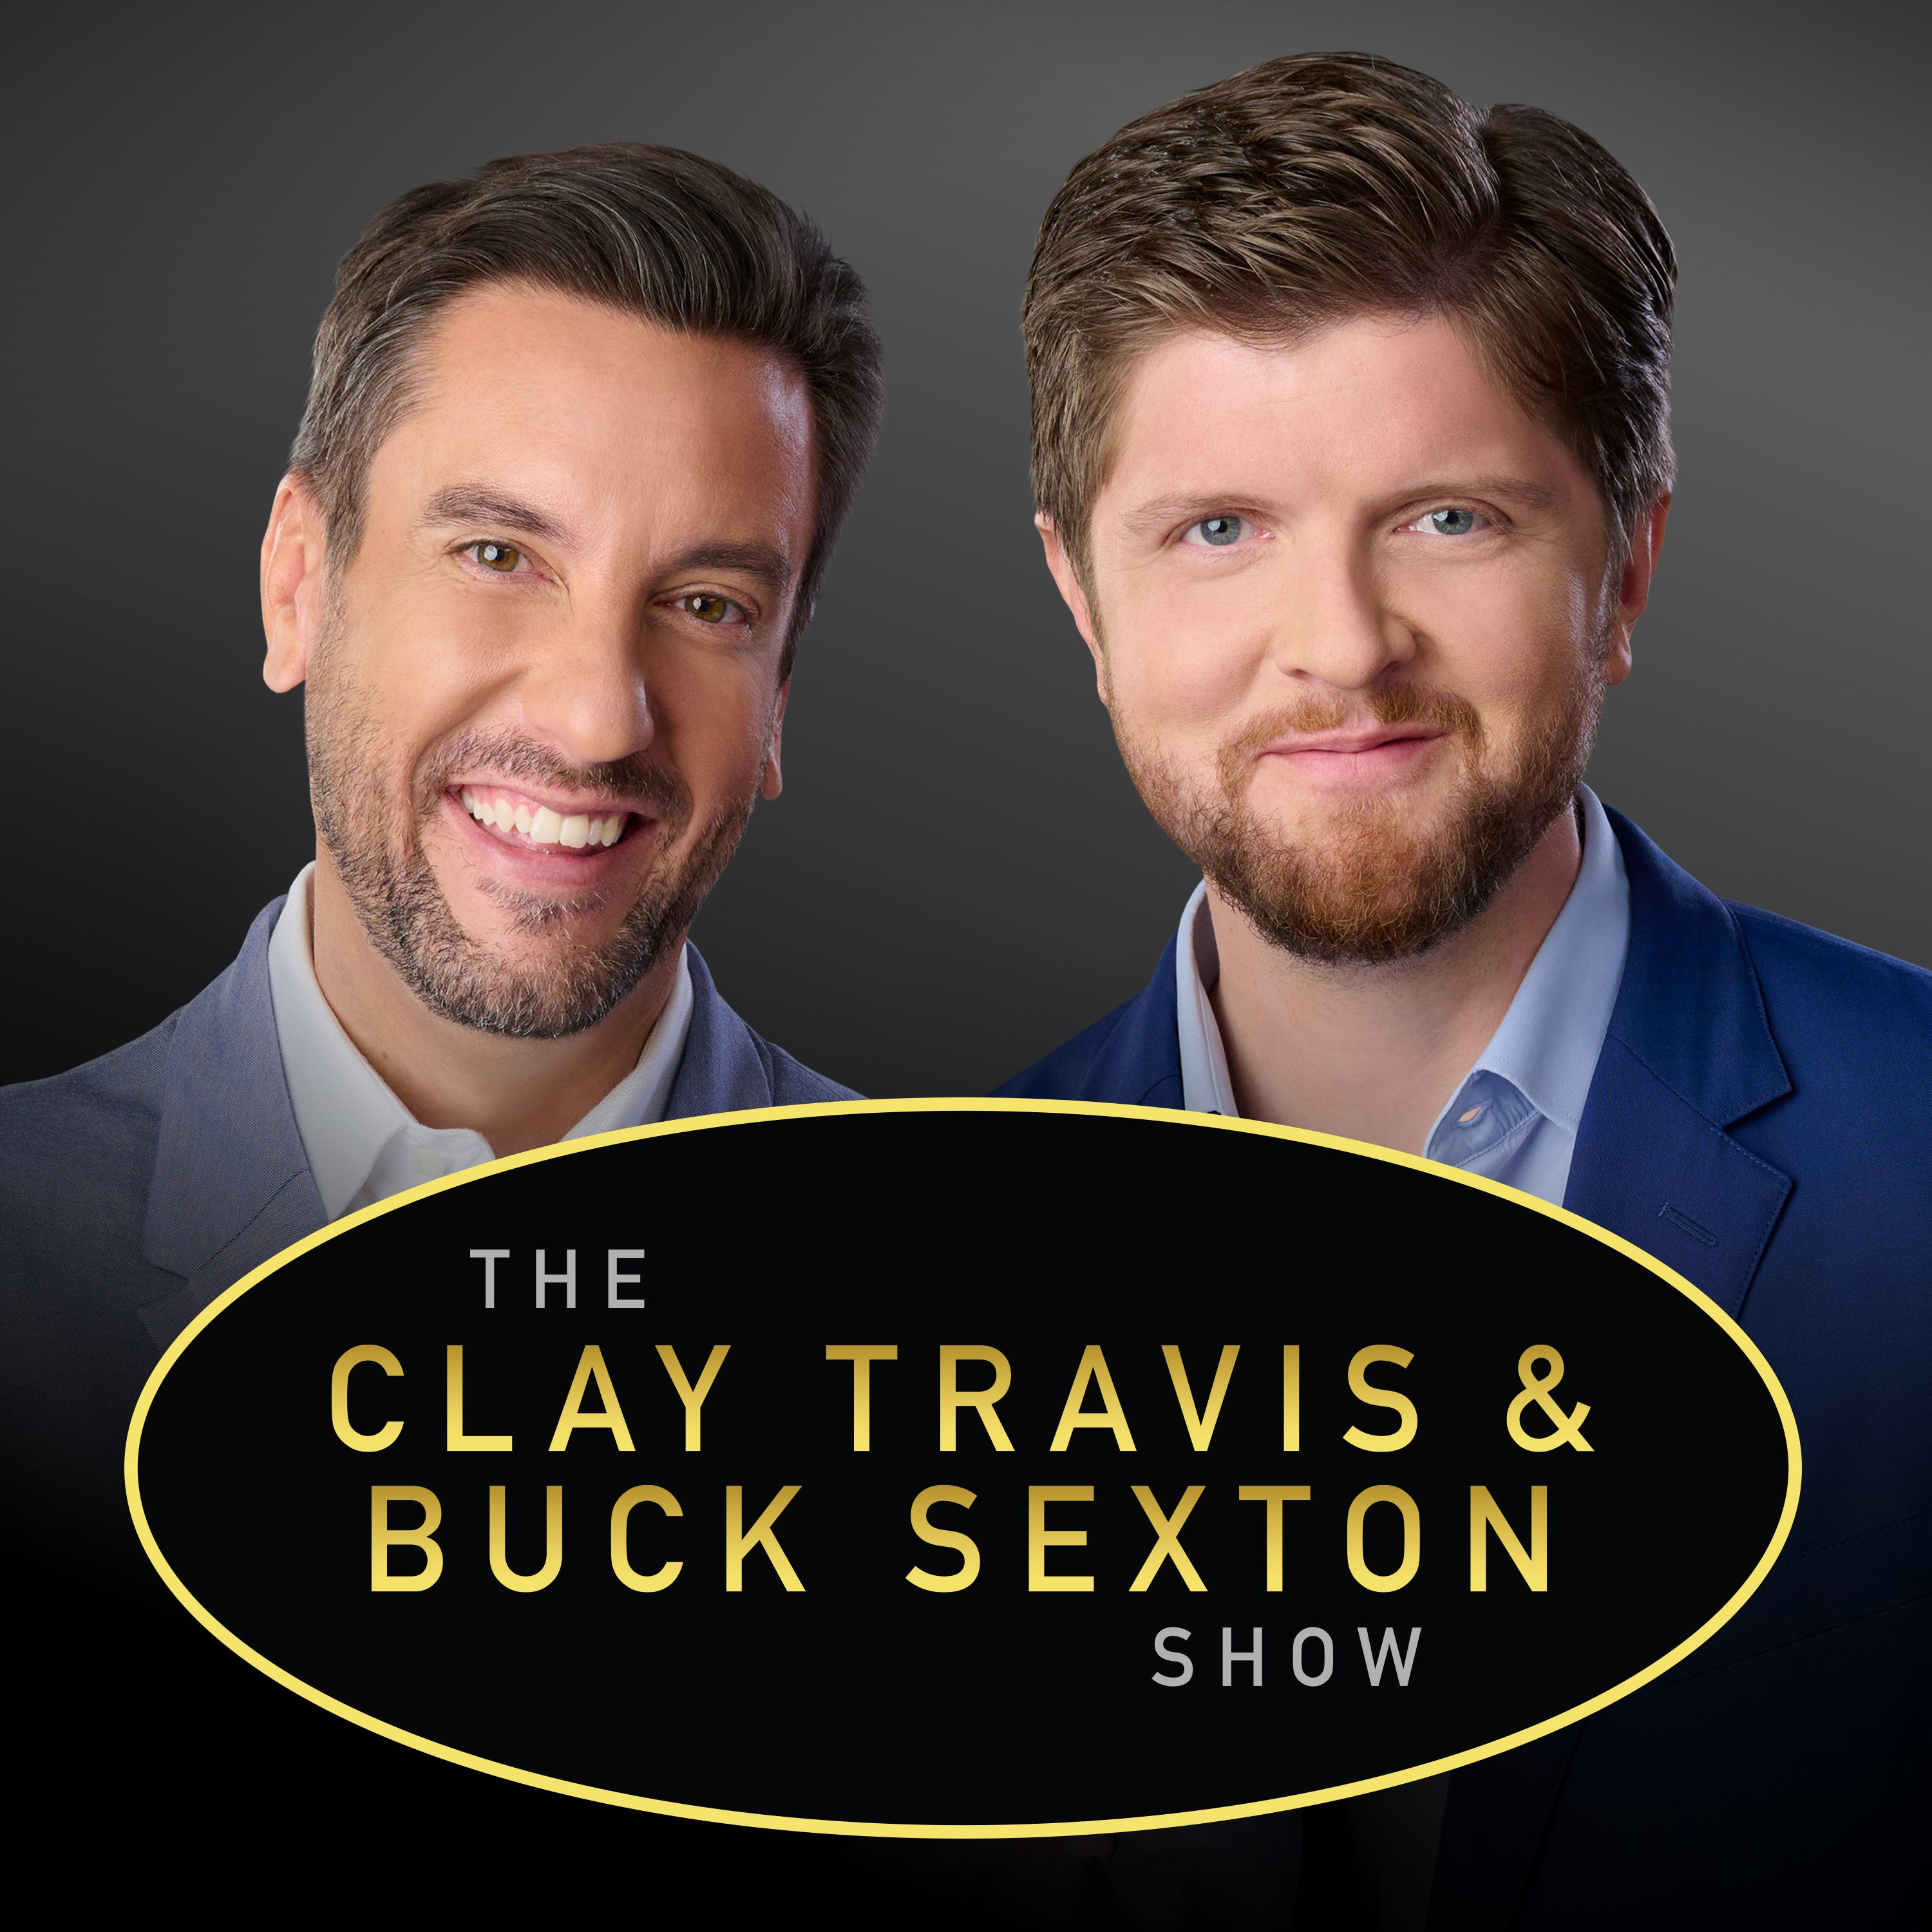 Clay Travis and Buck Sexton Show H1 – Sep 10 2021